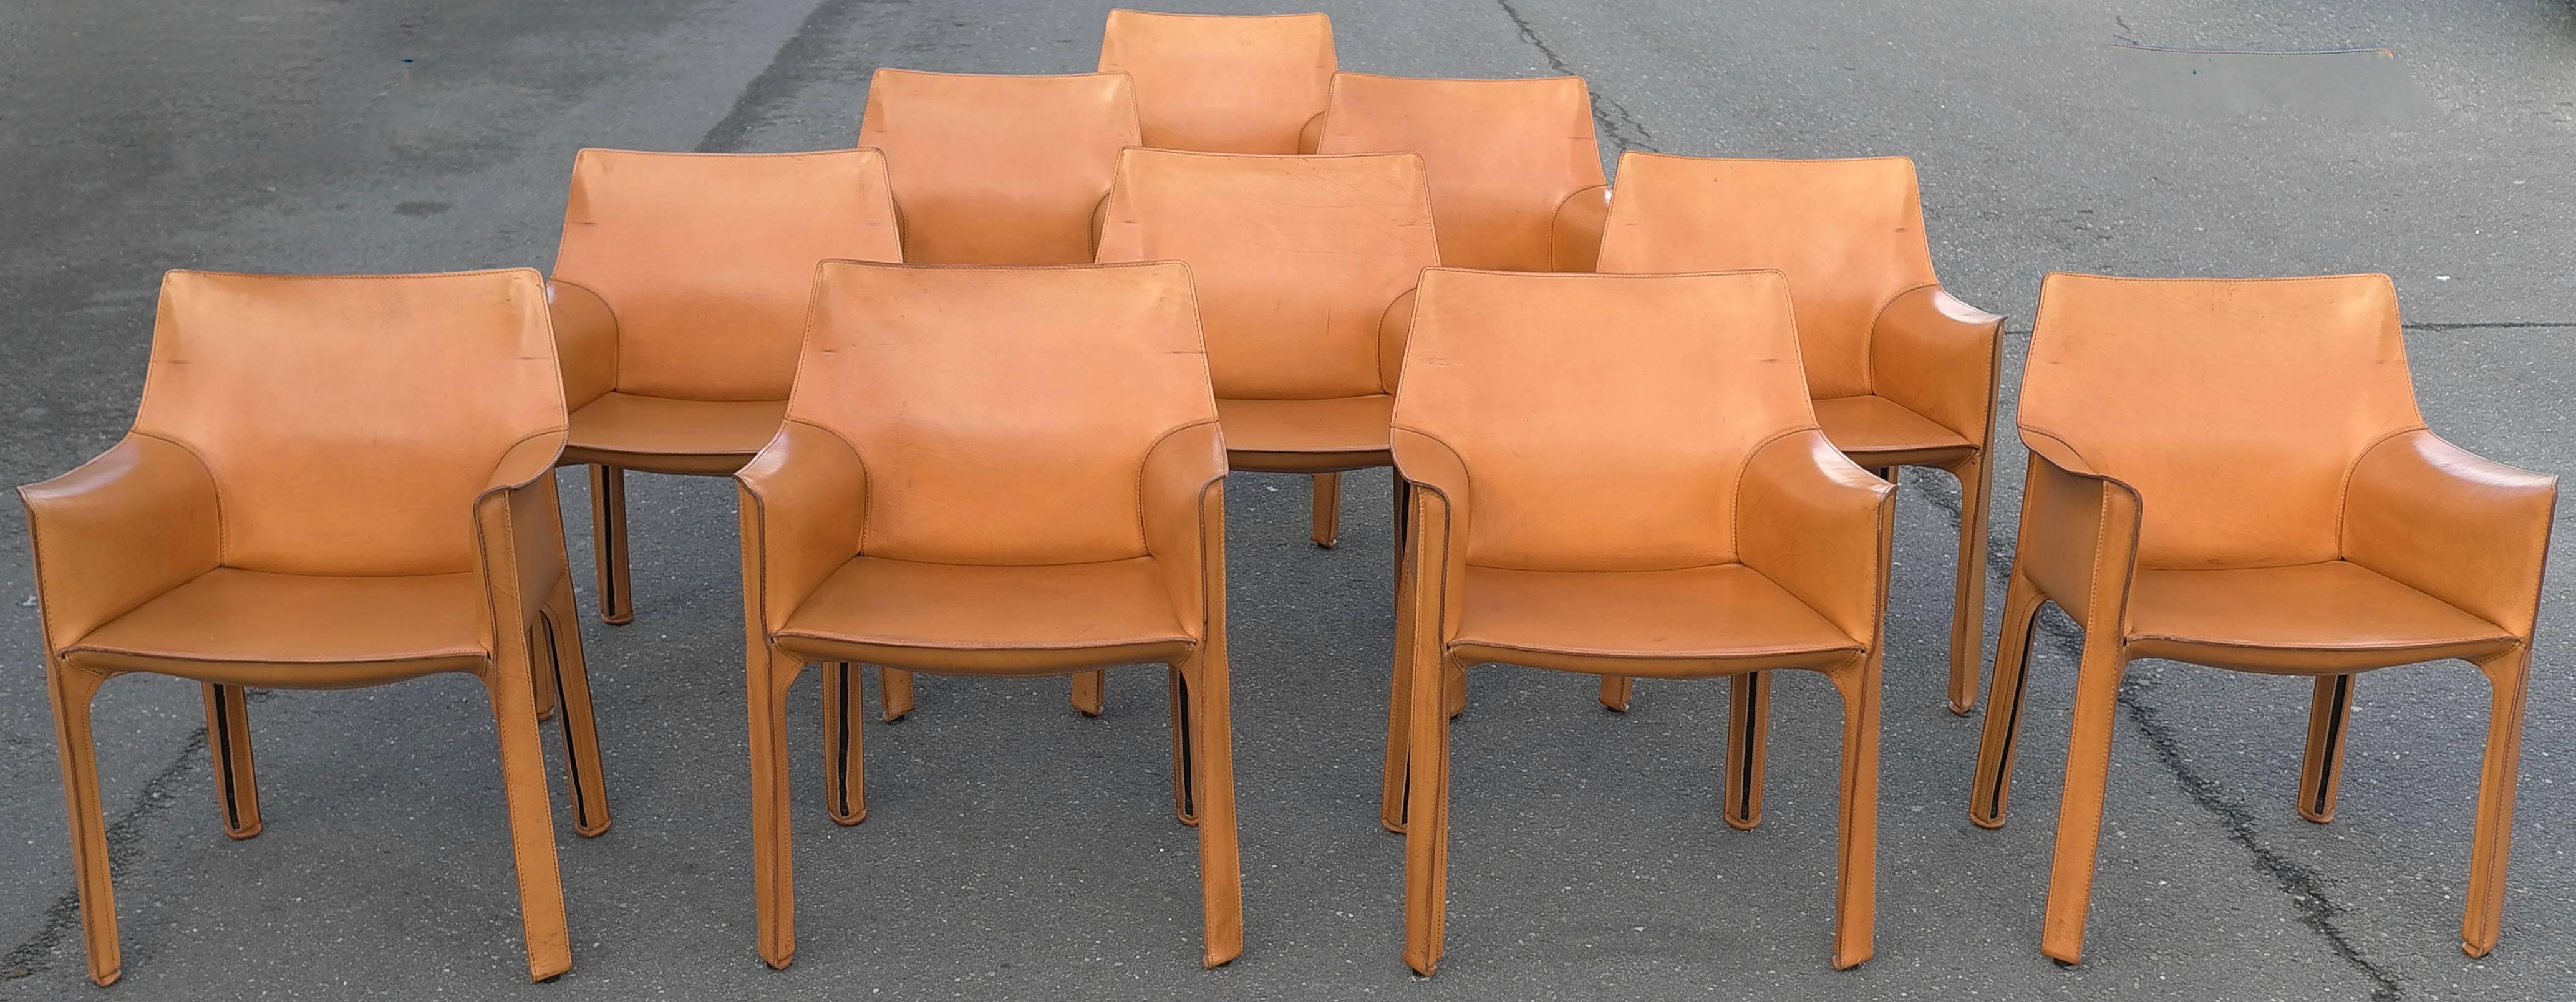 Late 20th Century Set of Ten Cab Dining Chairs by Mario Bellini for Cassina in Cognac Leather